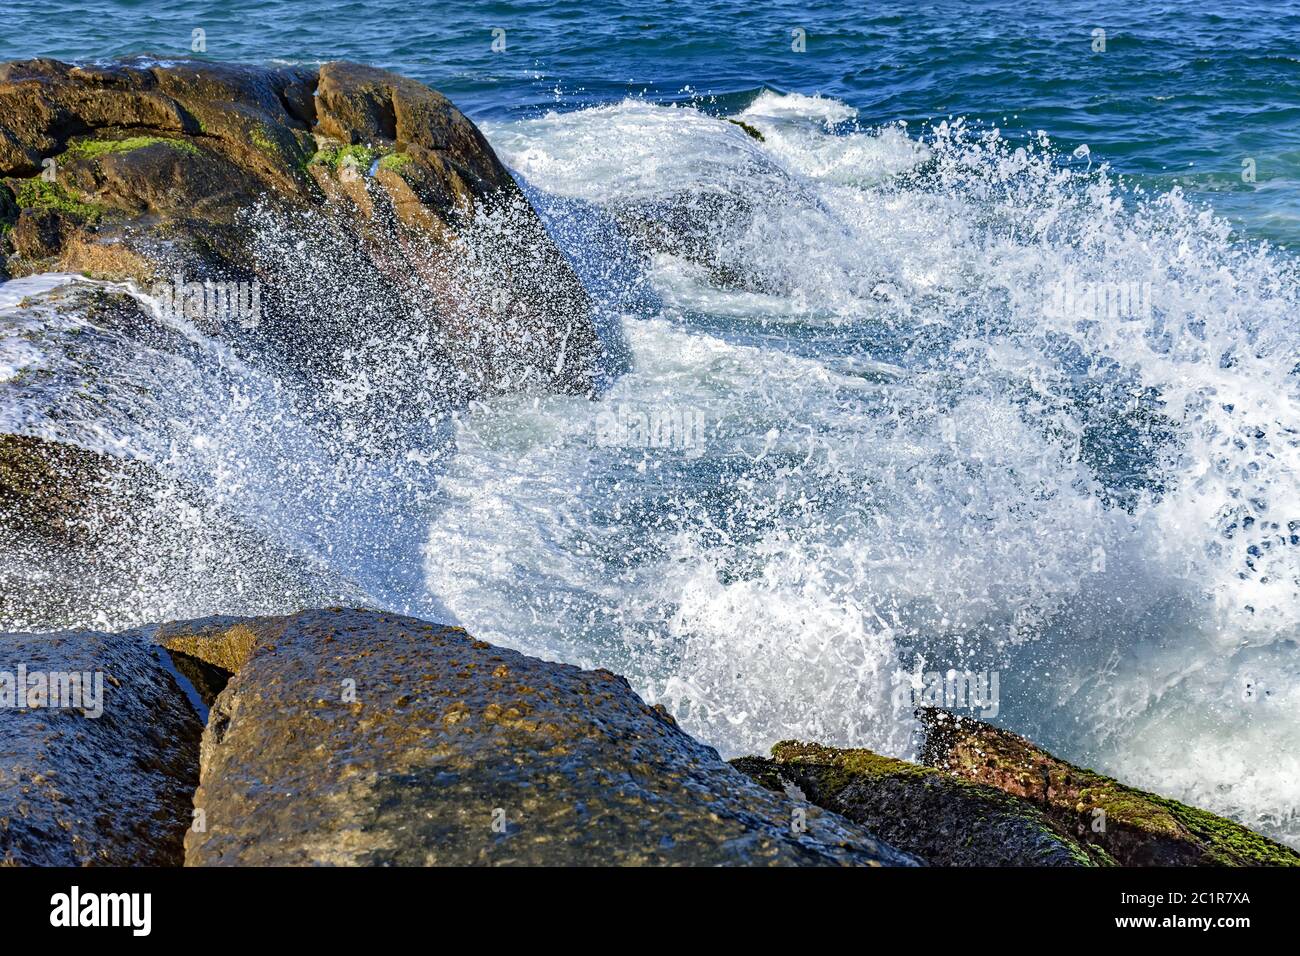 Waves crashing over rocks with water drops Stock Photo